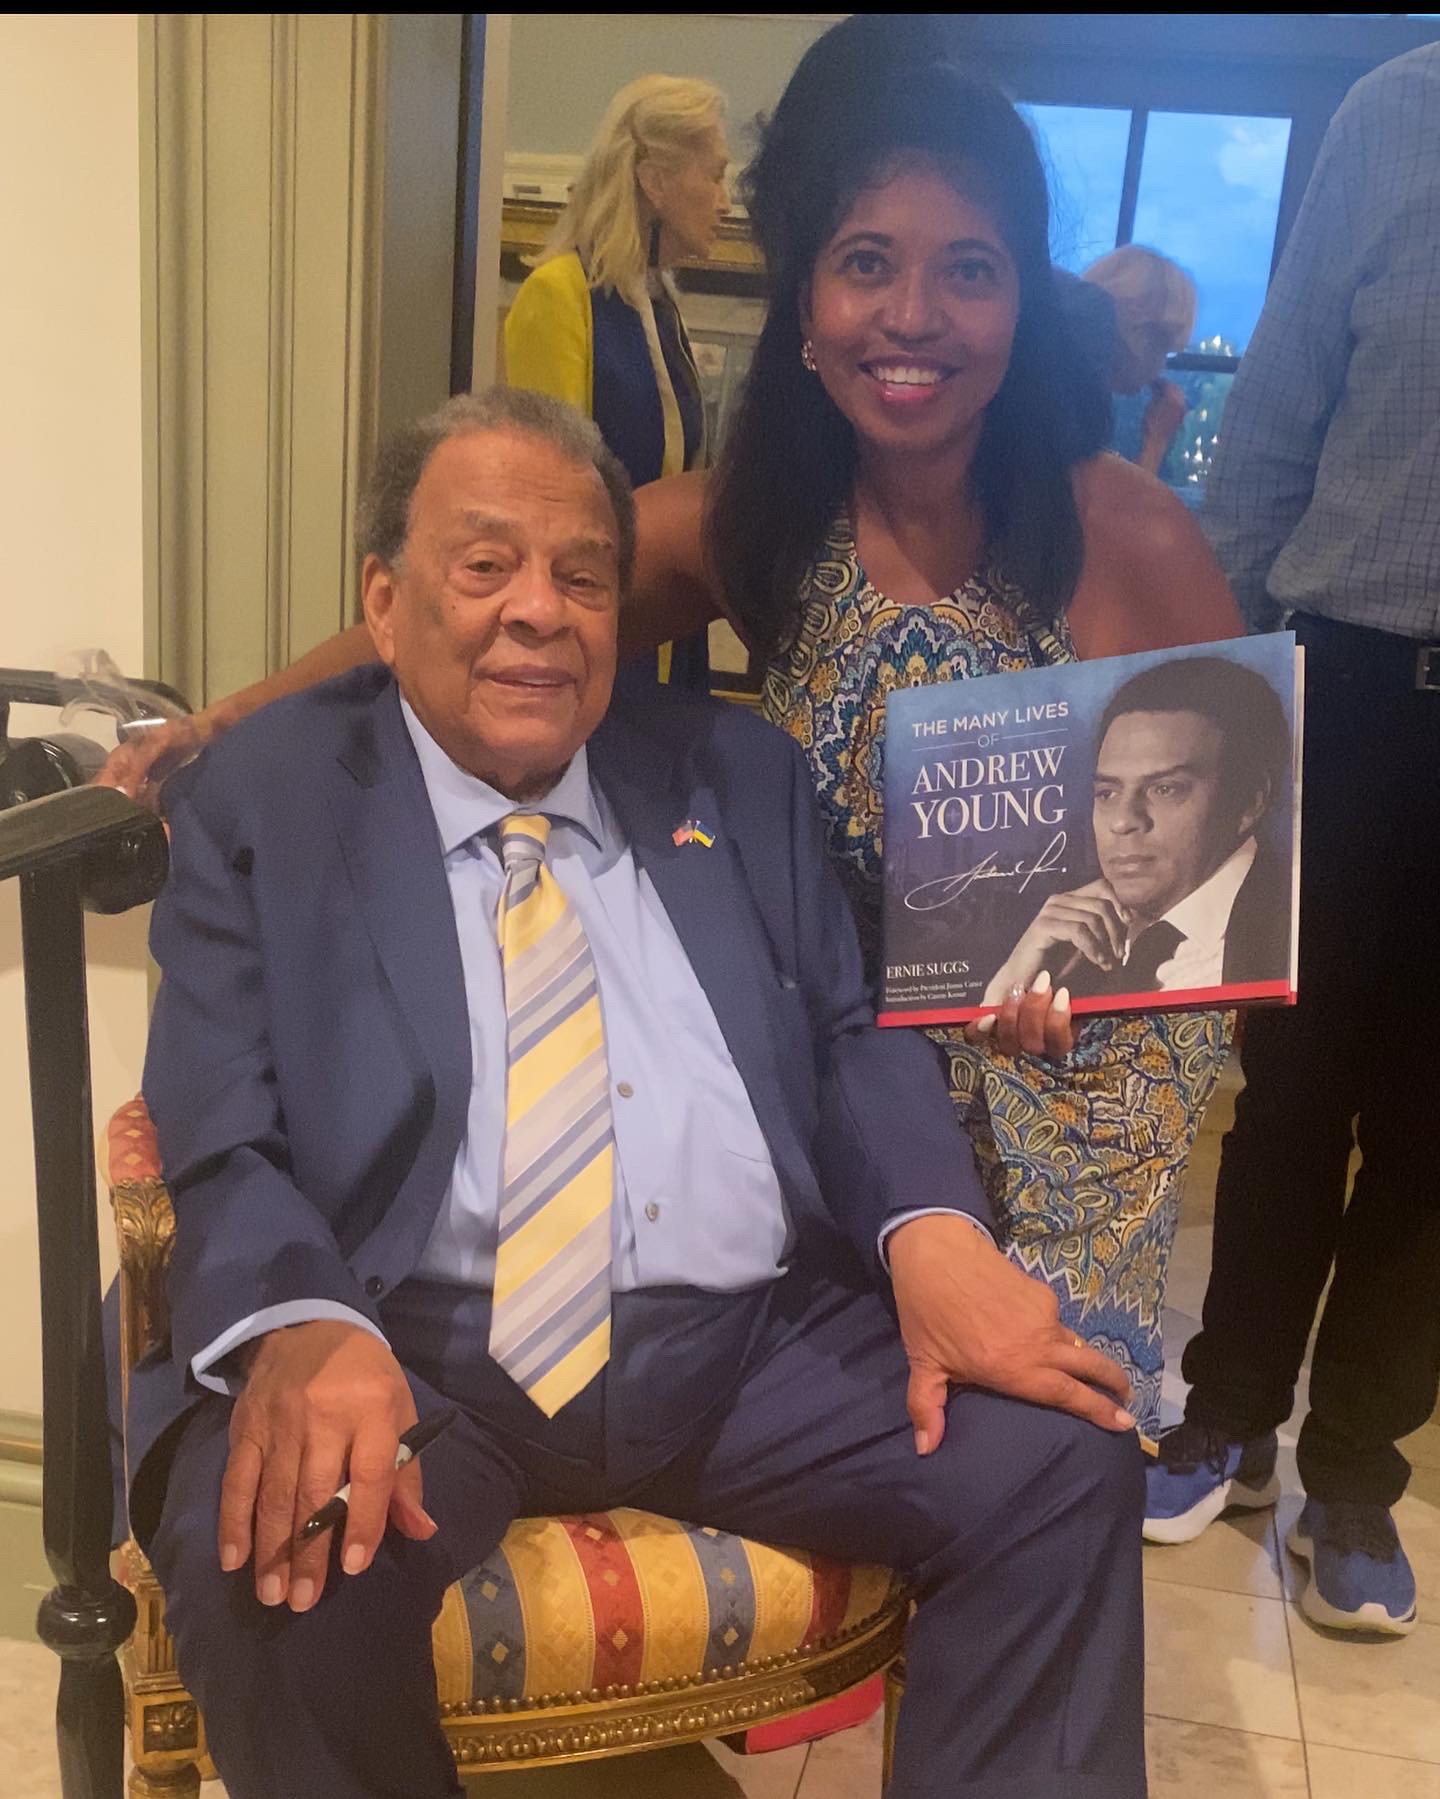 The Many Lives of Andrew Young Exhibit and Book Premier at the Millennium Gate Museum